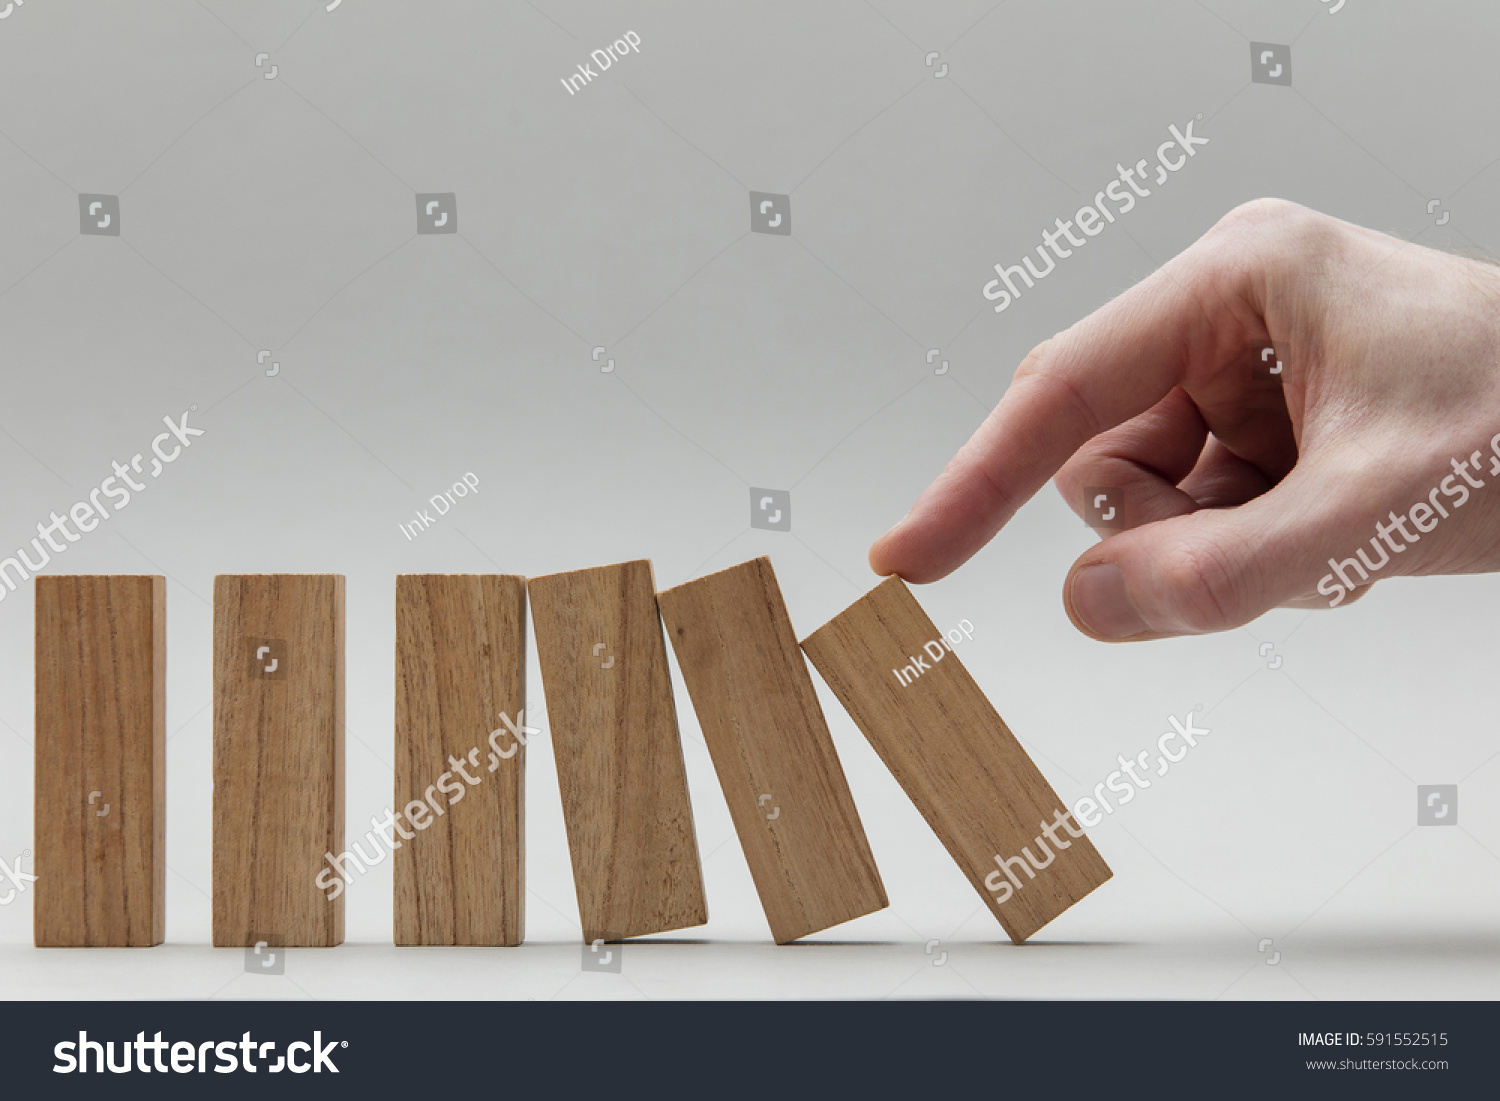 Male hand pushing over wooden blocks. Business development and growth concept
 #591552515